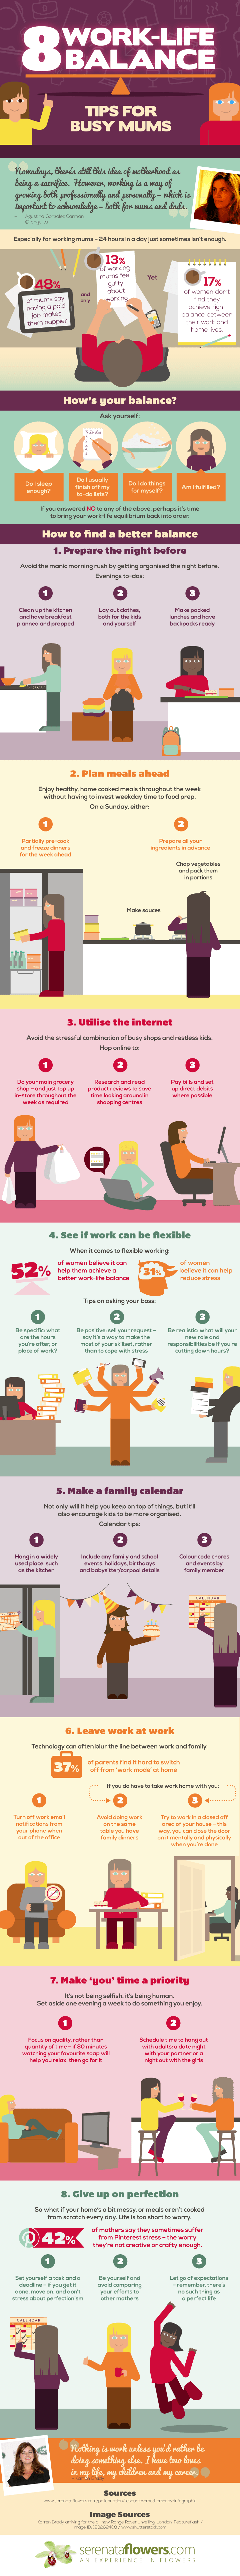 8 Work-Life Balance Tips for Busy Mums Infographic